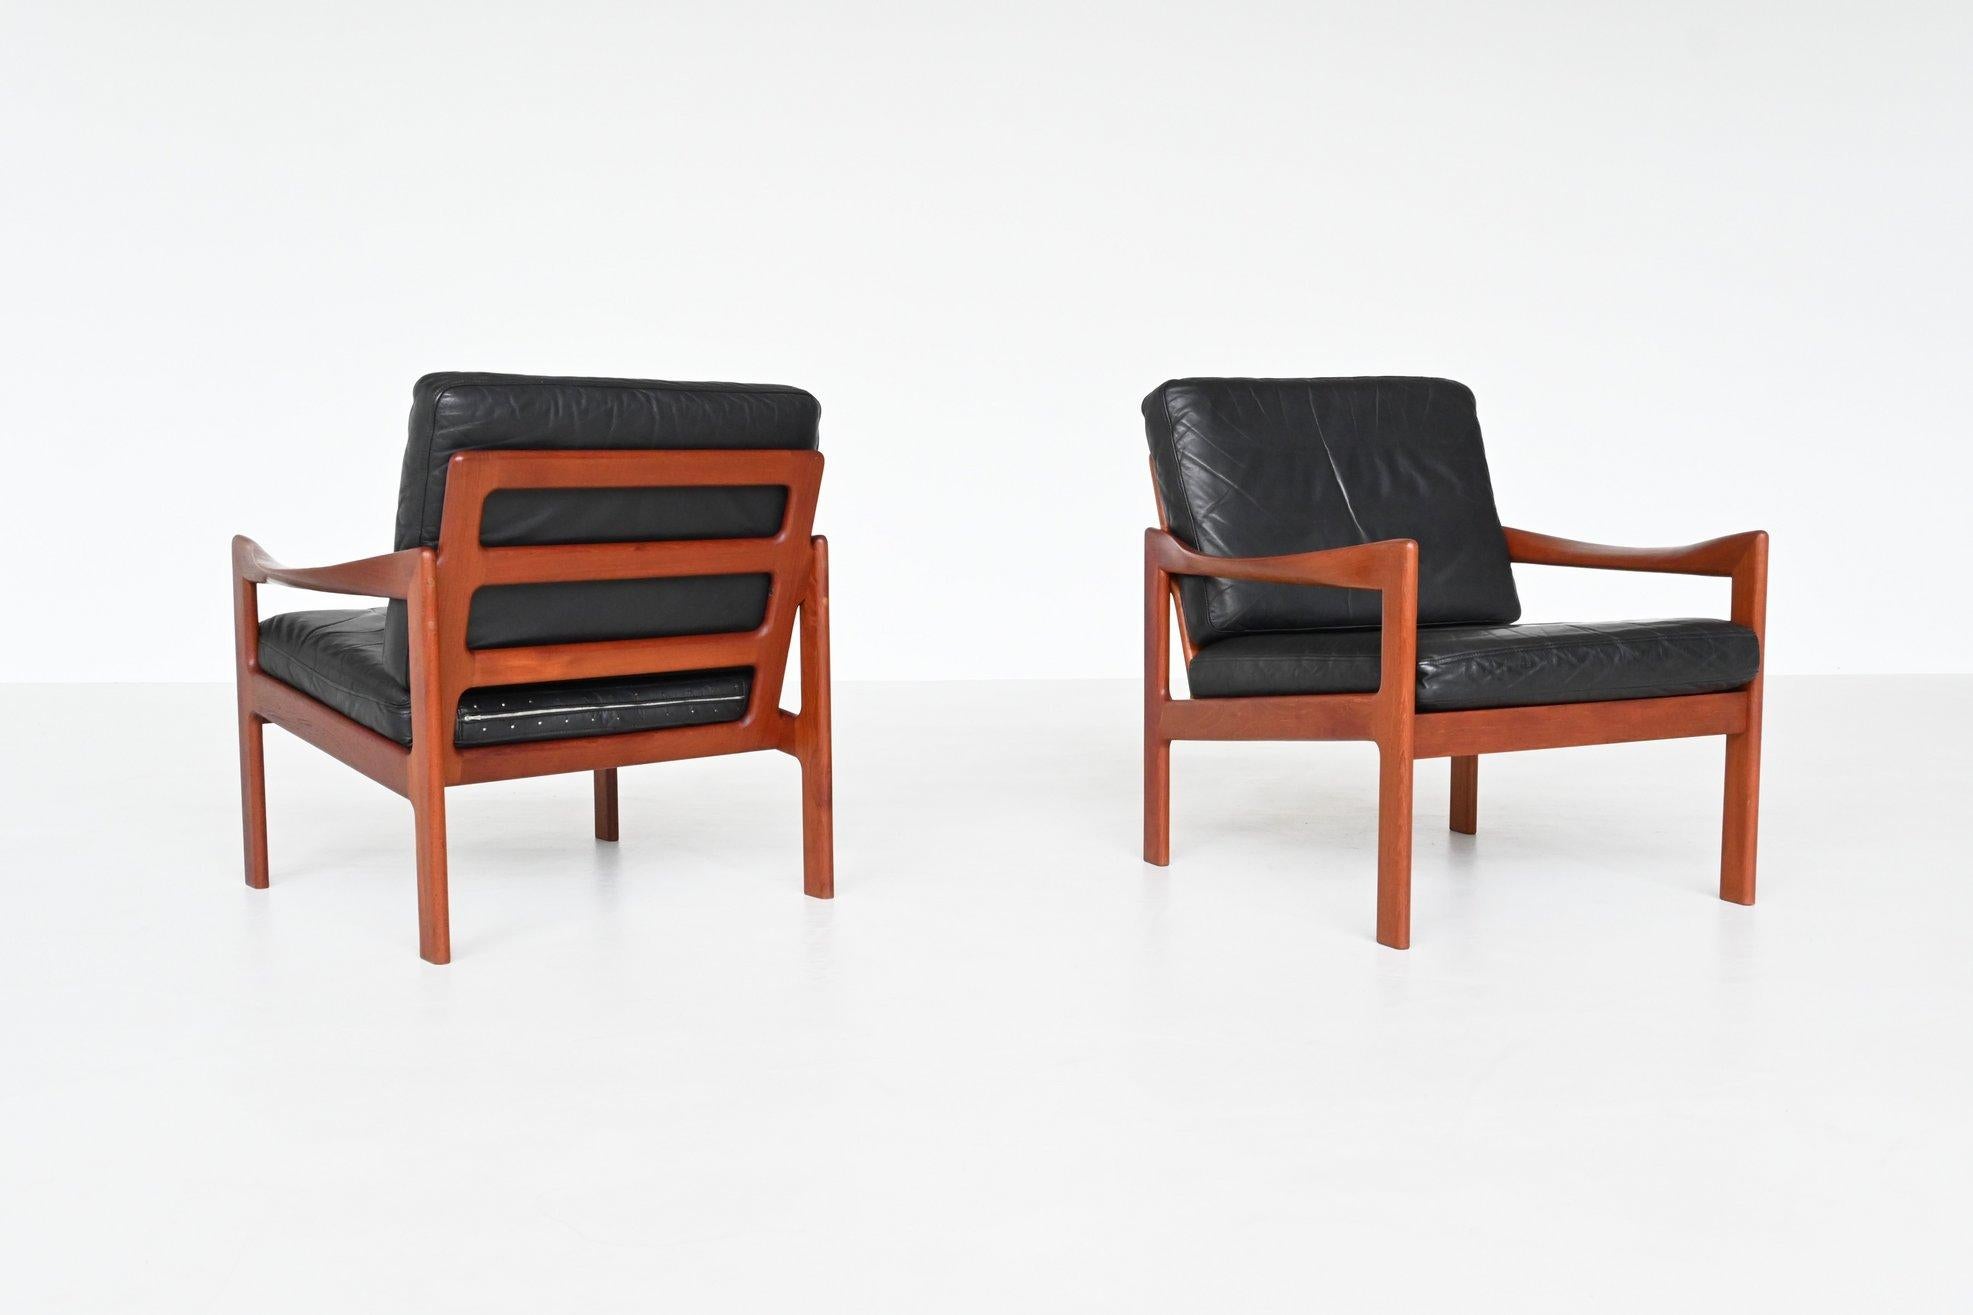 Beautiful elegant shaped pair of lounge chairs designed by Illum Wikkelsø and manufactured by Niels Eilersen, Denmark 1962. These sculpted low back chairs feature a solid teak wooden frame and the cushions are upholstered with original black